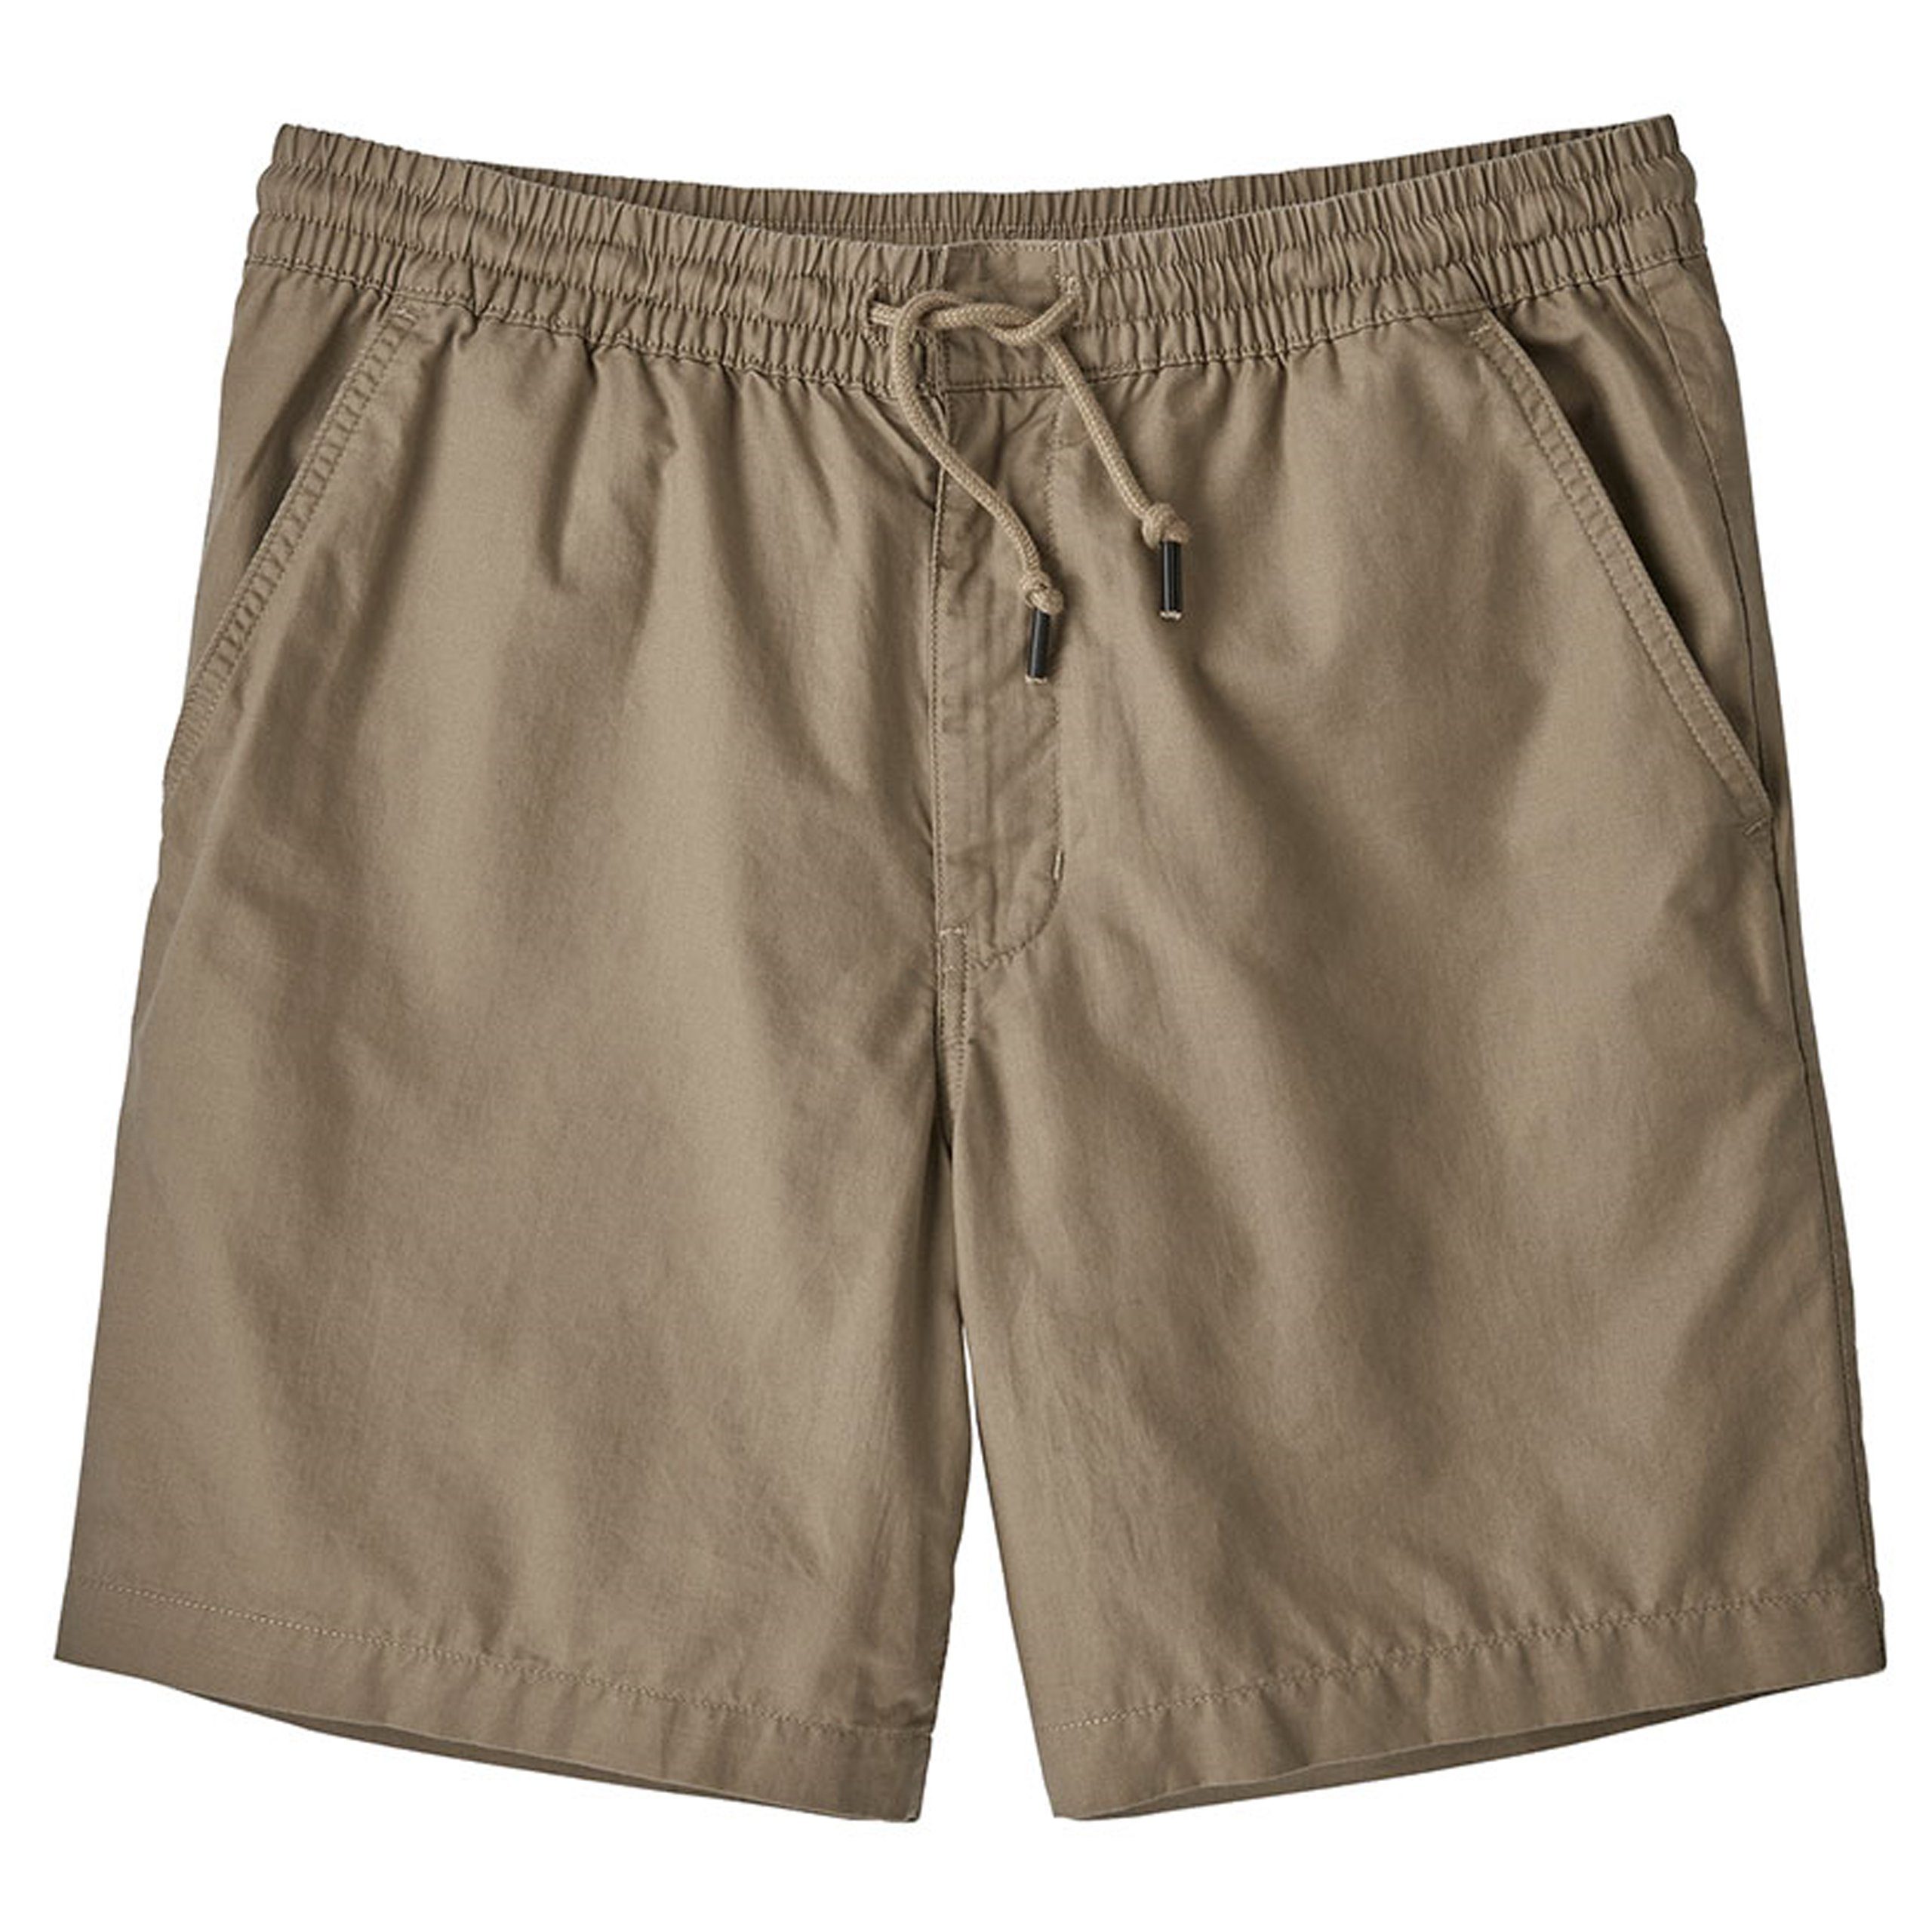 Patagonia 7 Mens Hemp Funktionshose All-Wear Shorts Volley Lightweight Patagonia